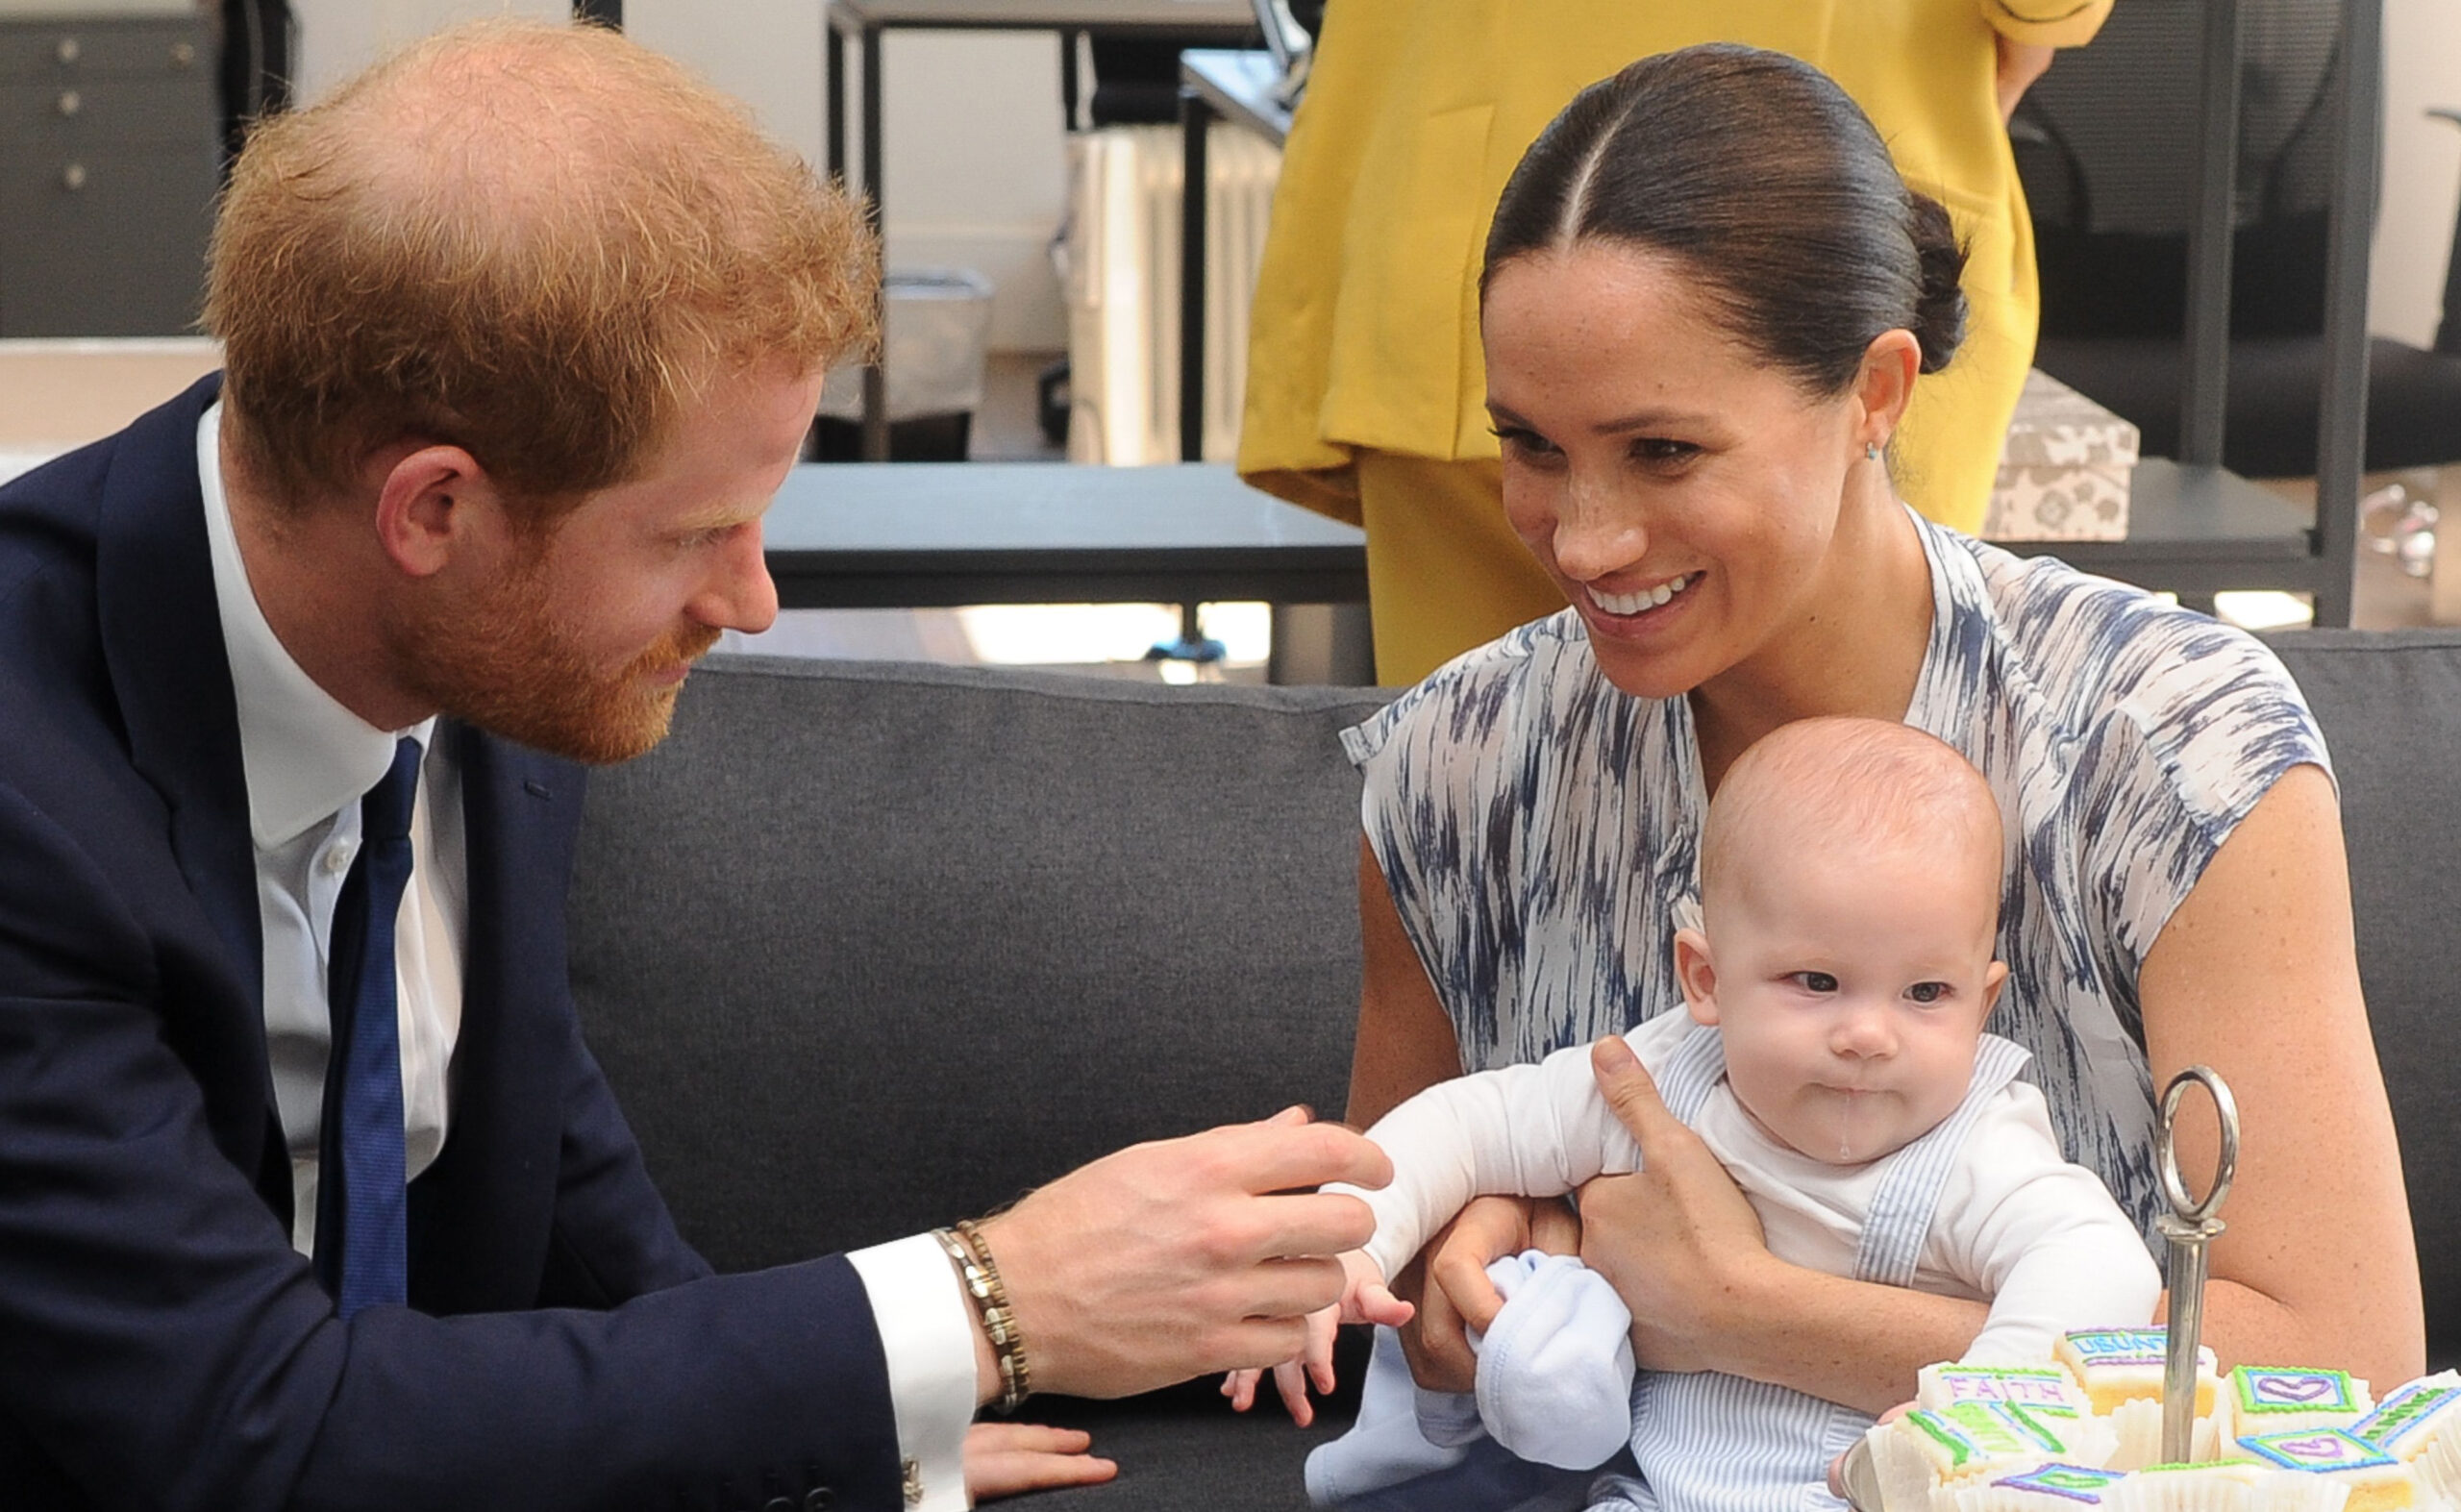 Prince Harry admits his fears about Archie and Lilibet’s future: “I’m learning to know better”